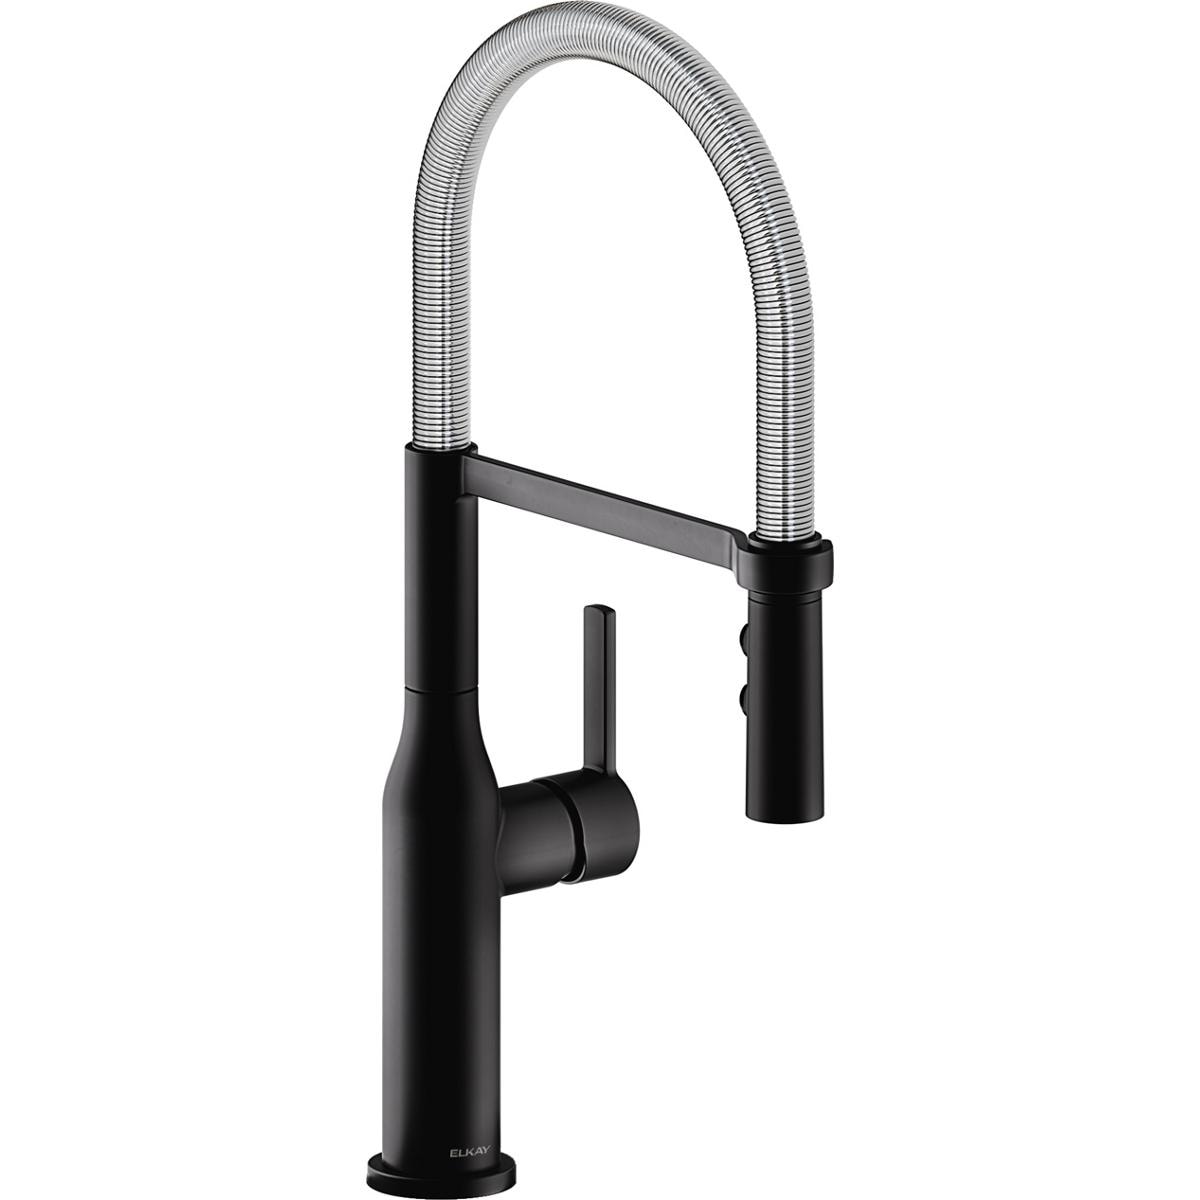 Elkay Avado Single Hole Kitchen Faucet with Semi-professional Spout and  Forward Only Lever Handle Bed Bath  Beyond 31208845